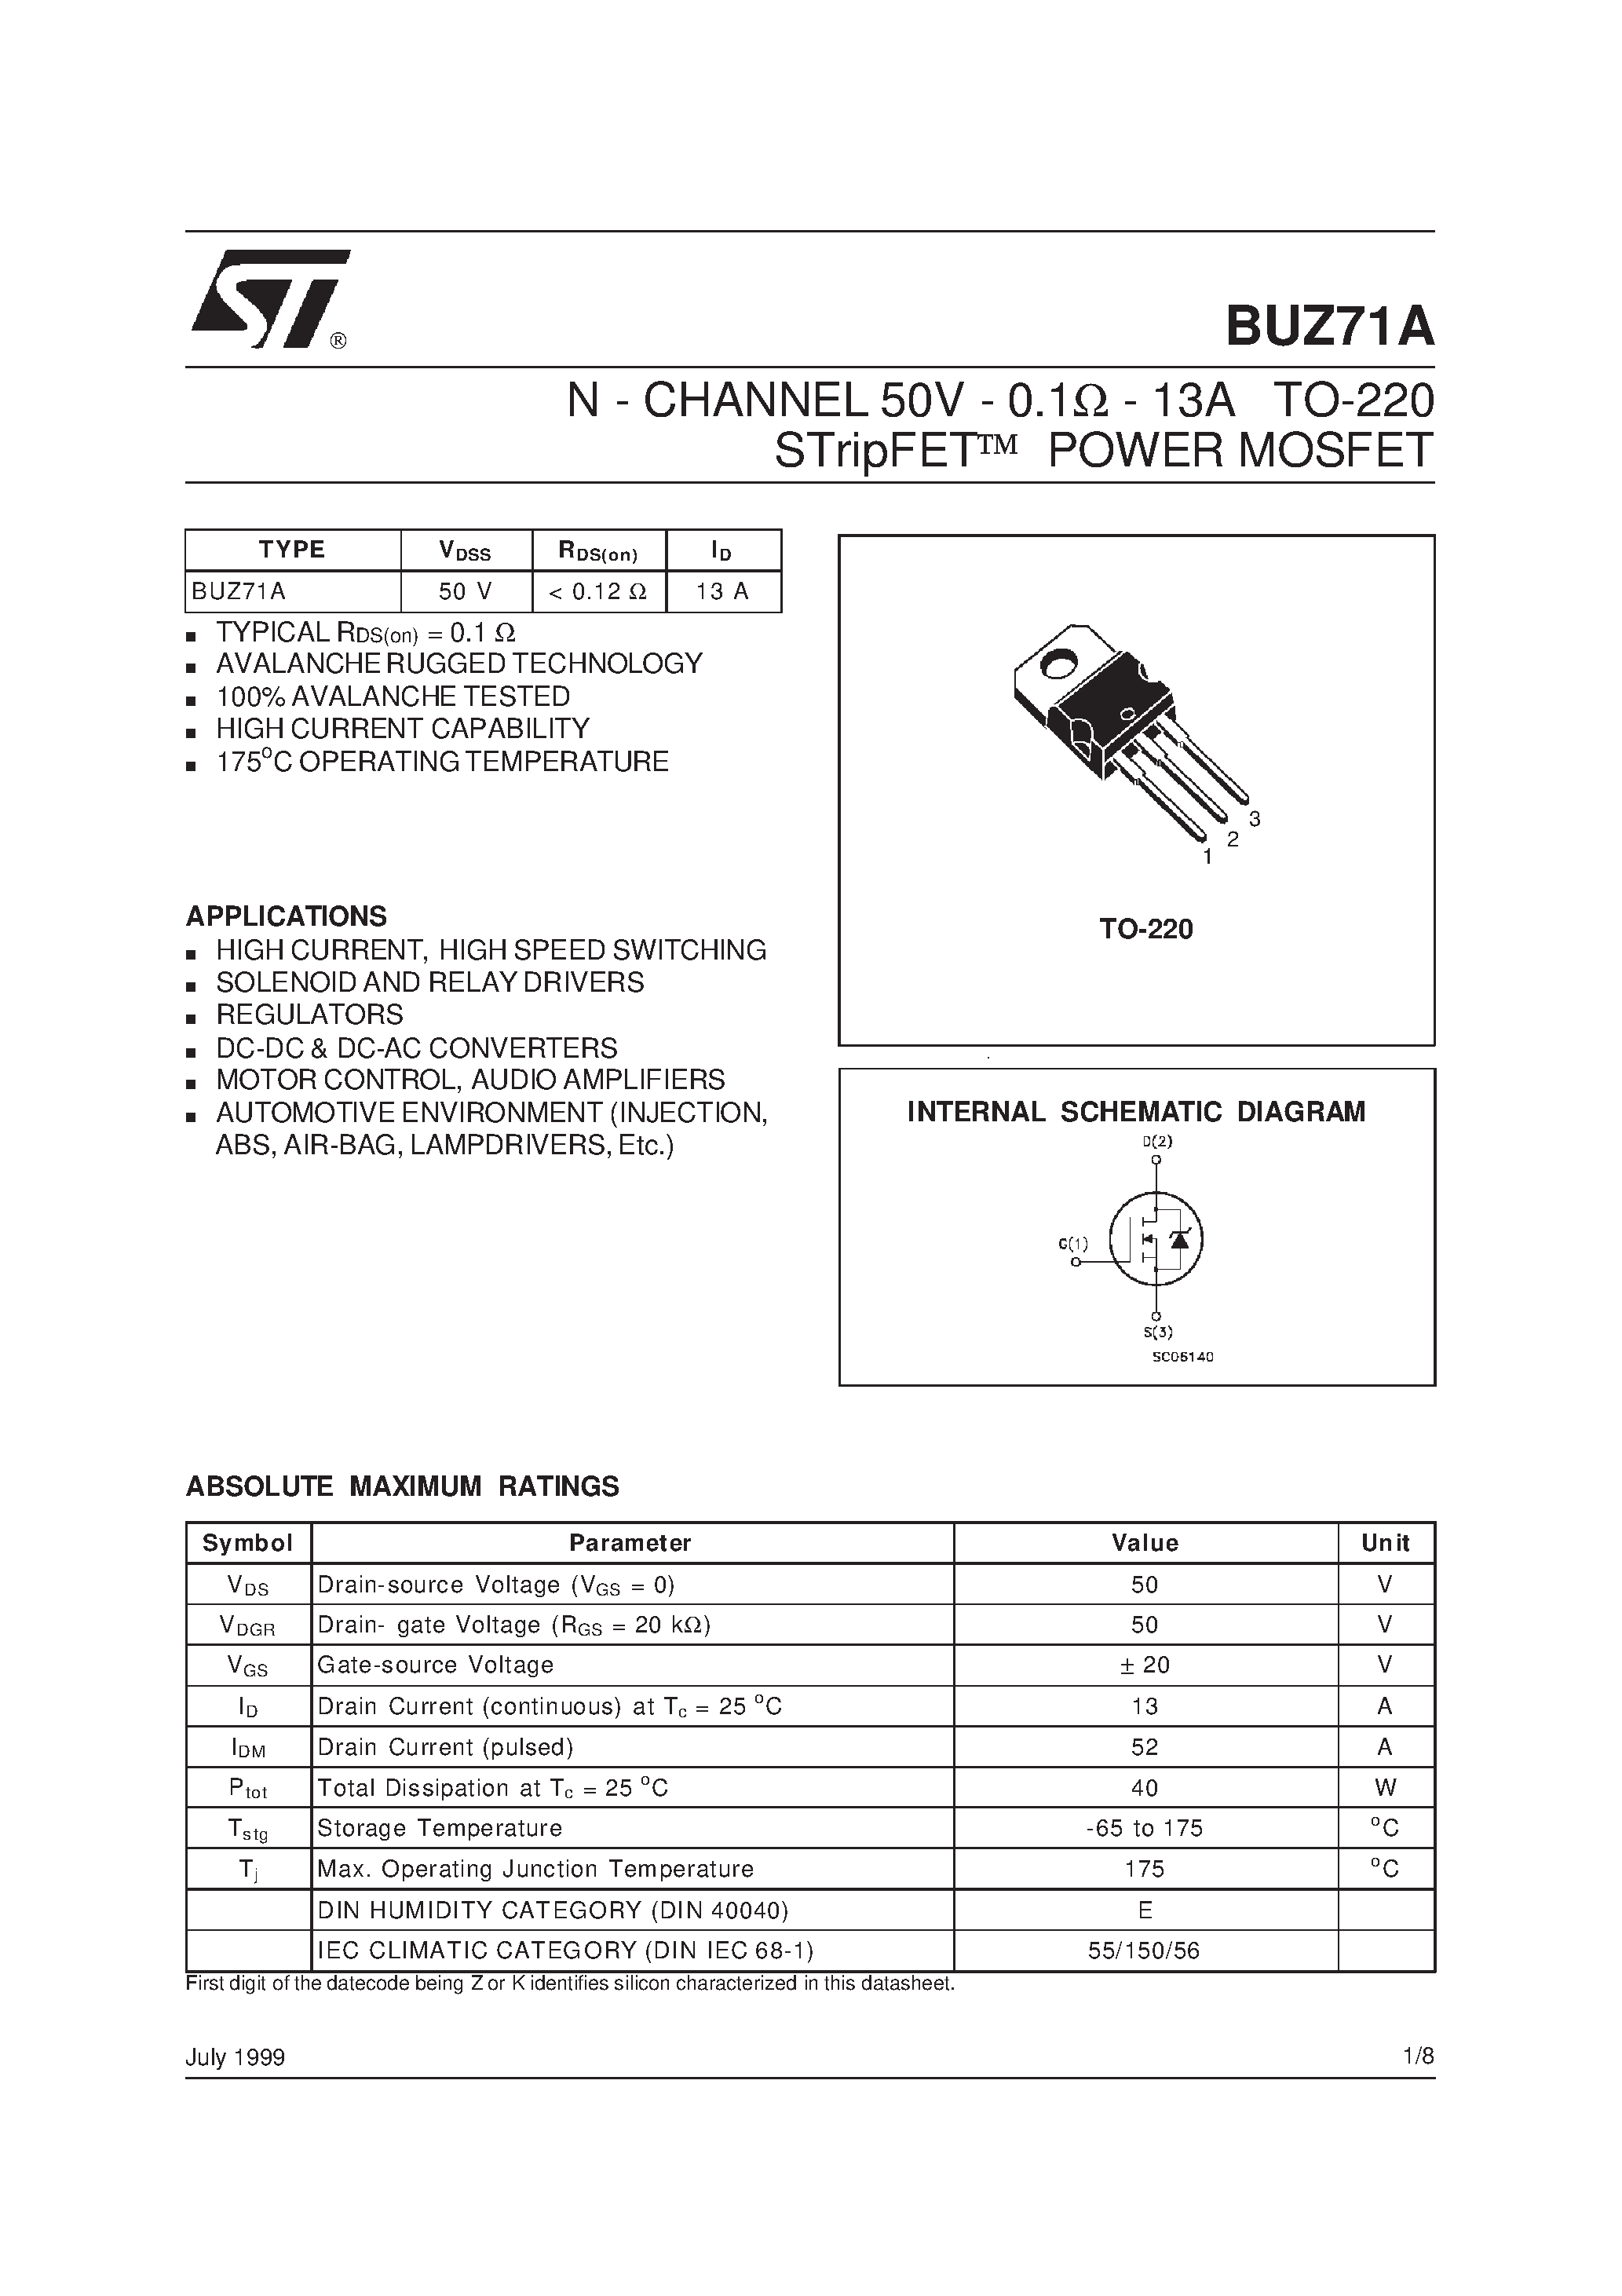 Datasheet BUZ71A - N - CHANNEL 50V - 0.1W - 13A TO-220 STripFET] POWER MOSFET page 1